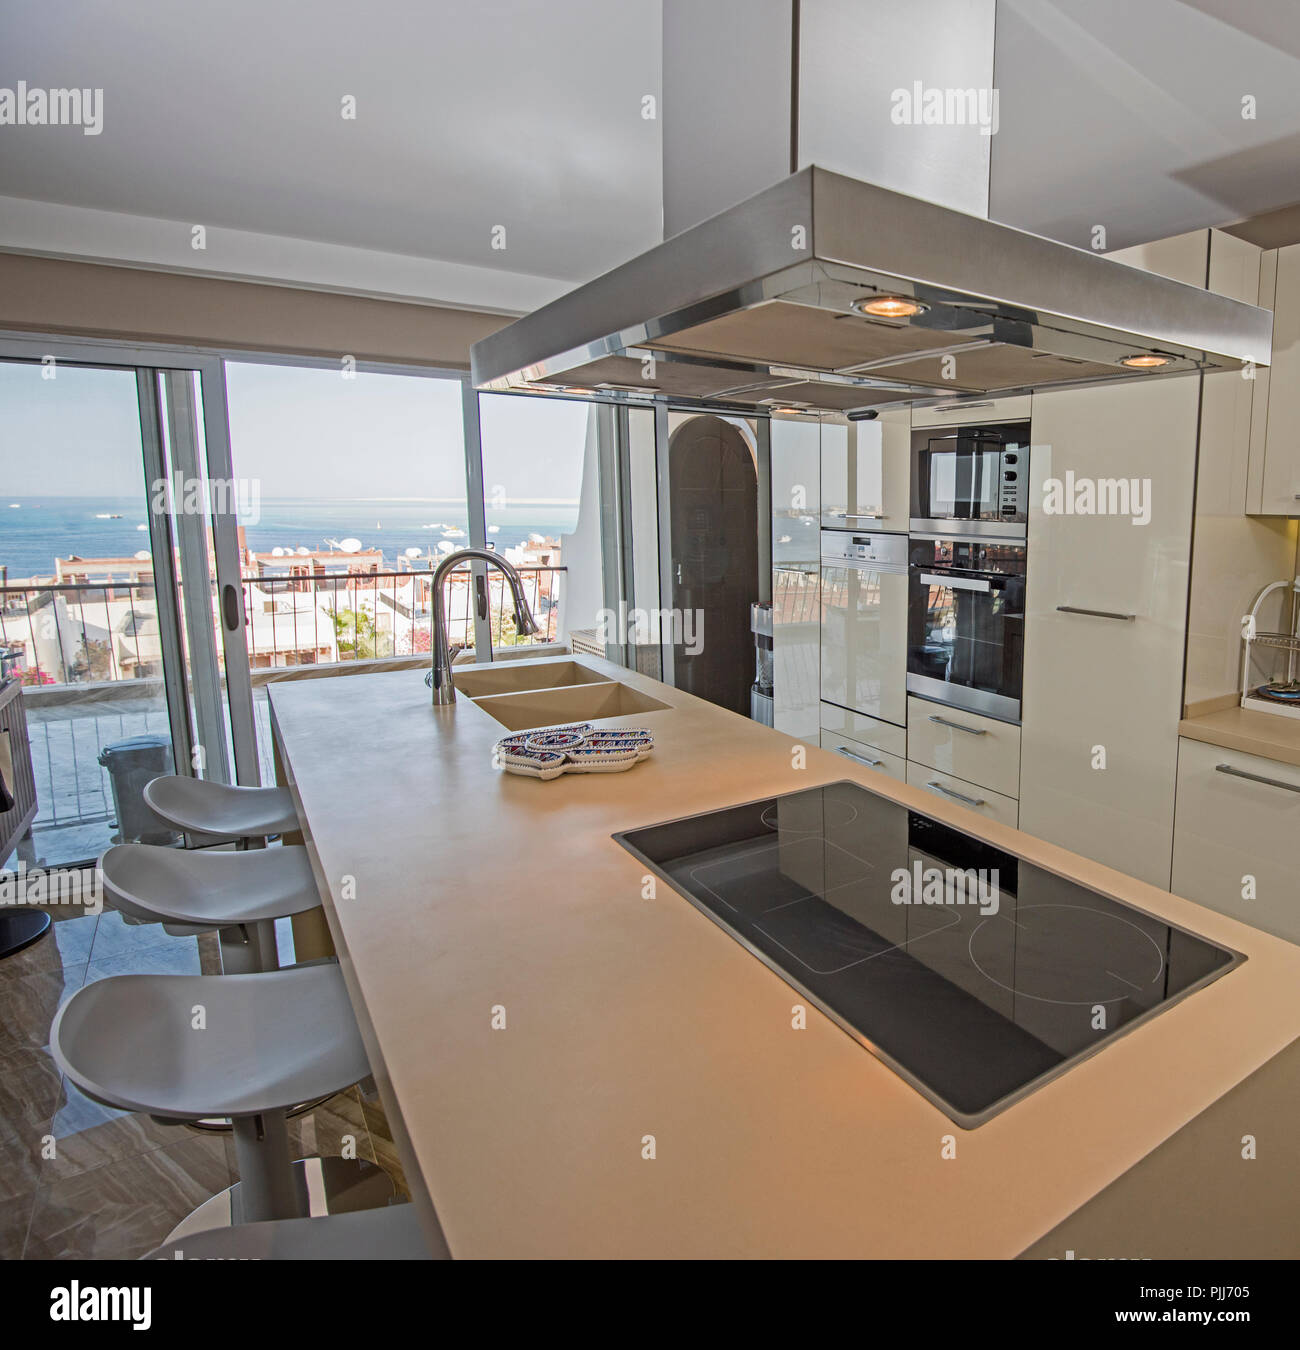 Interior design decor showing modern kitchen and appliances in luxury apartment showroom with sea view Stock Photo